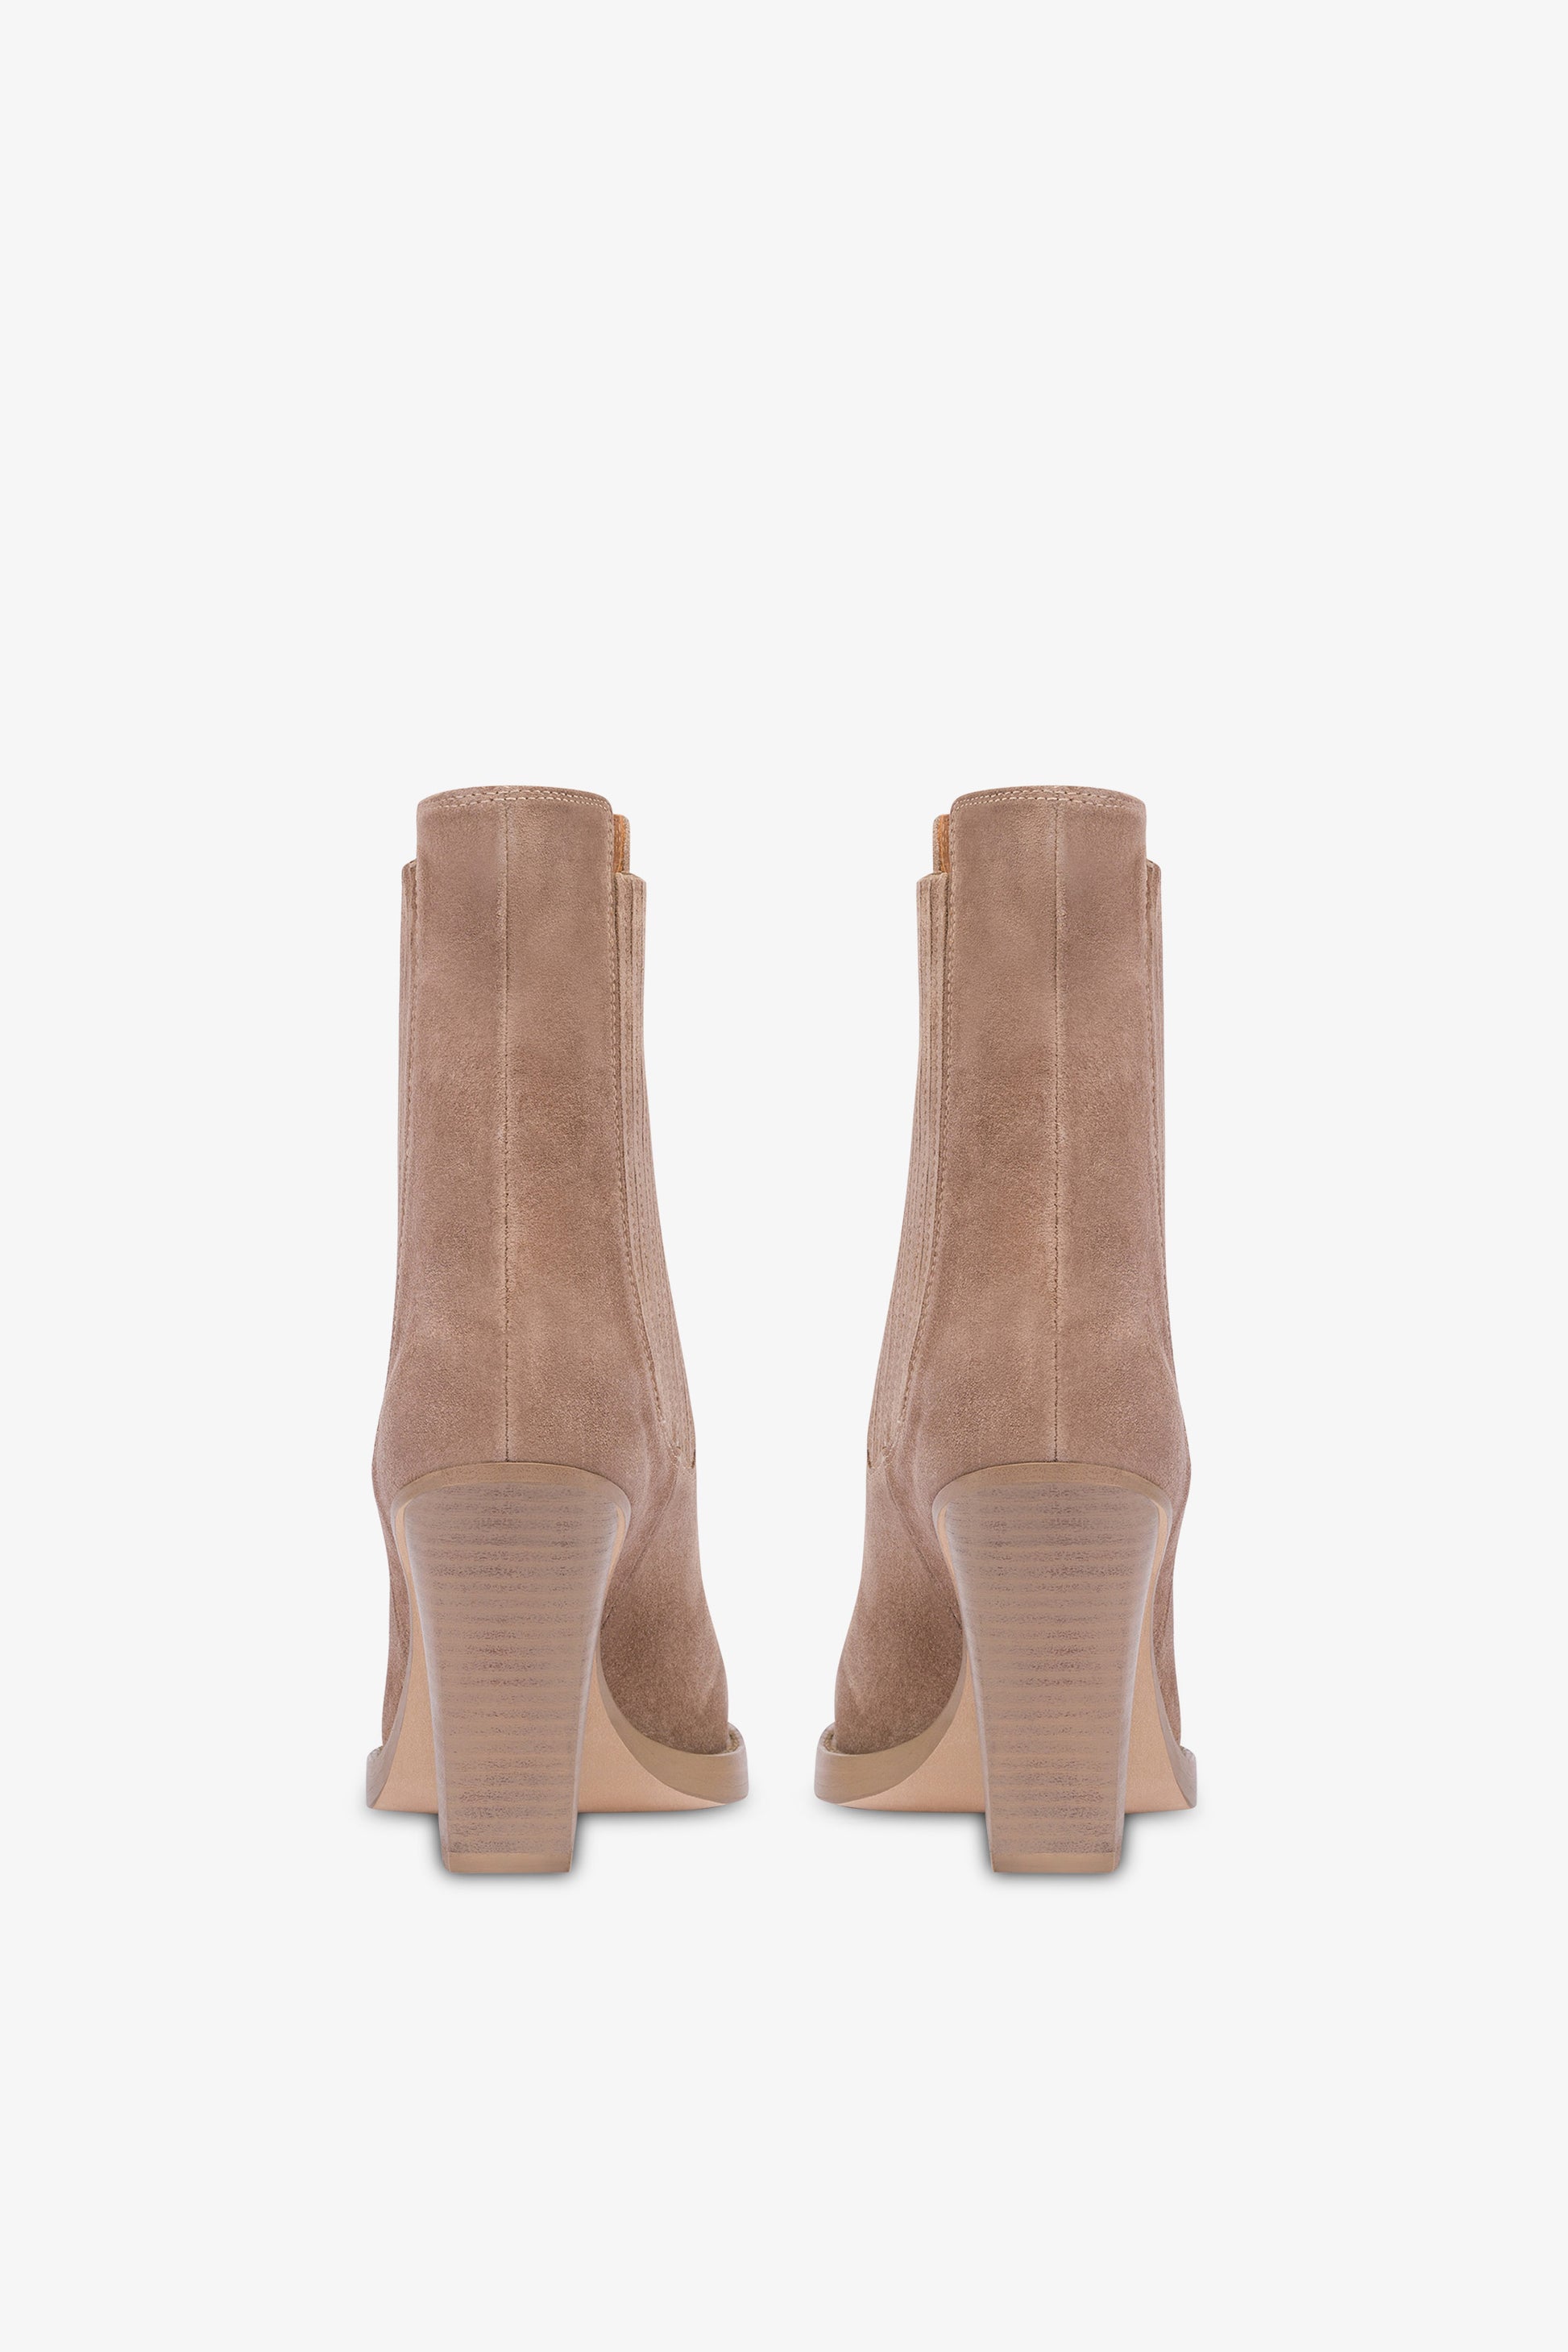 Square-toe ankle boots in koala suede leather